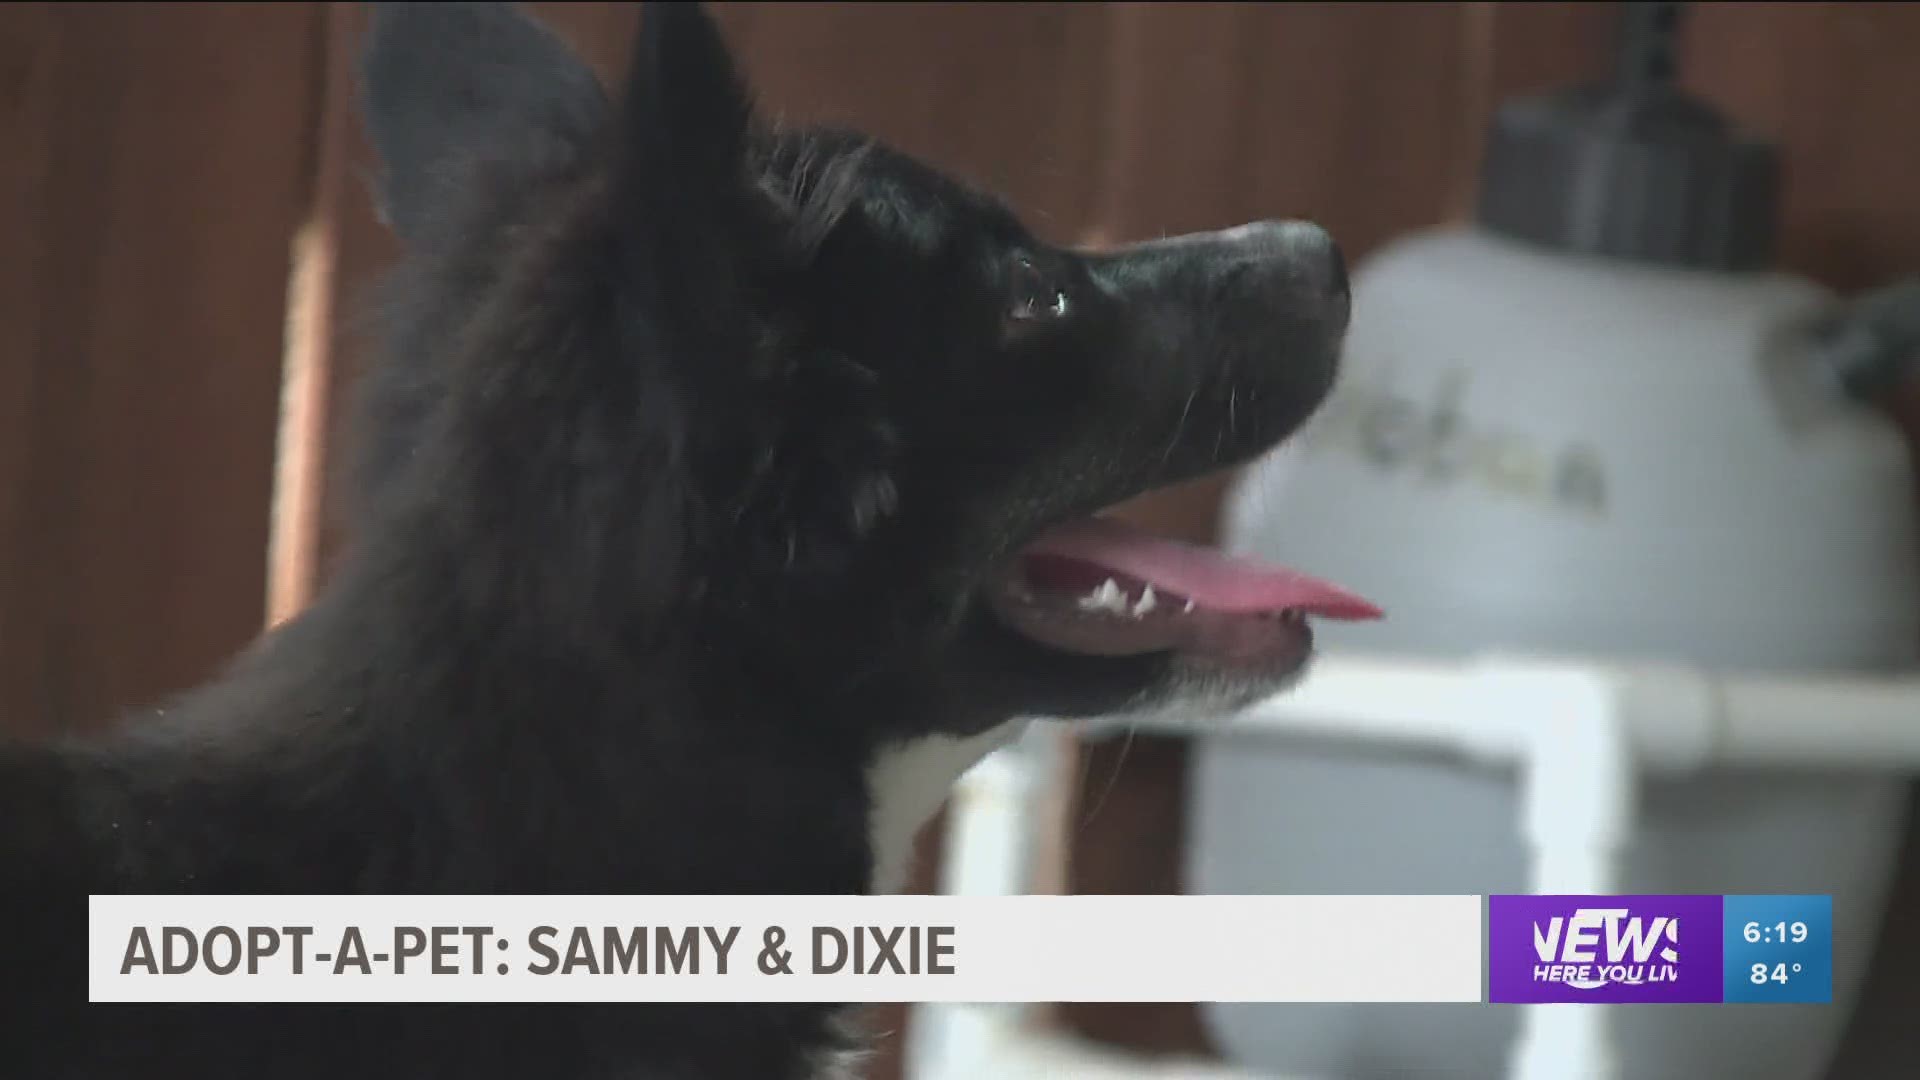 If you want a cat or a puppy, Sammy and Dixie are waiting for you at the Lowell Animal Shelter. https://bit.ly/3msJqIp